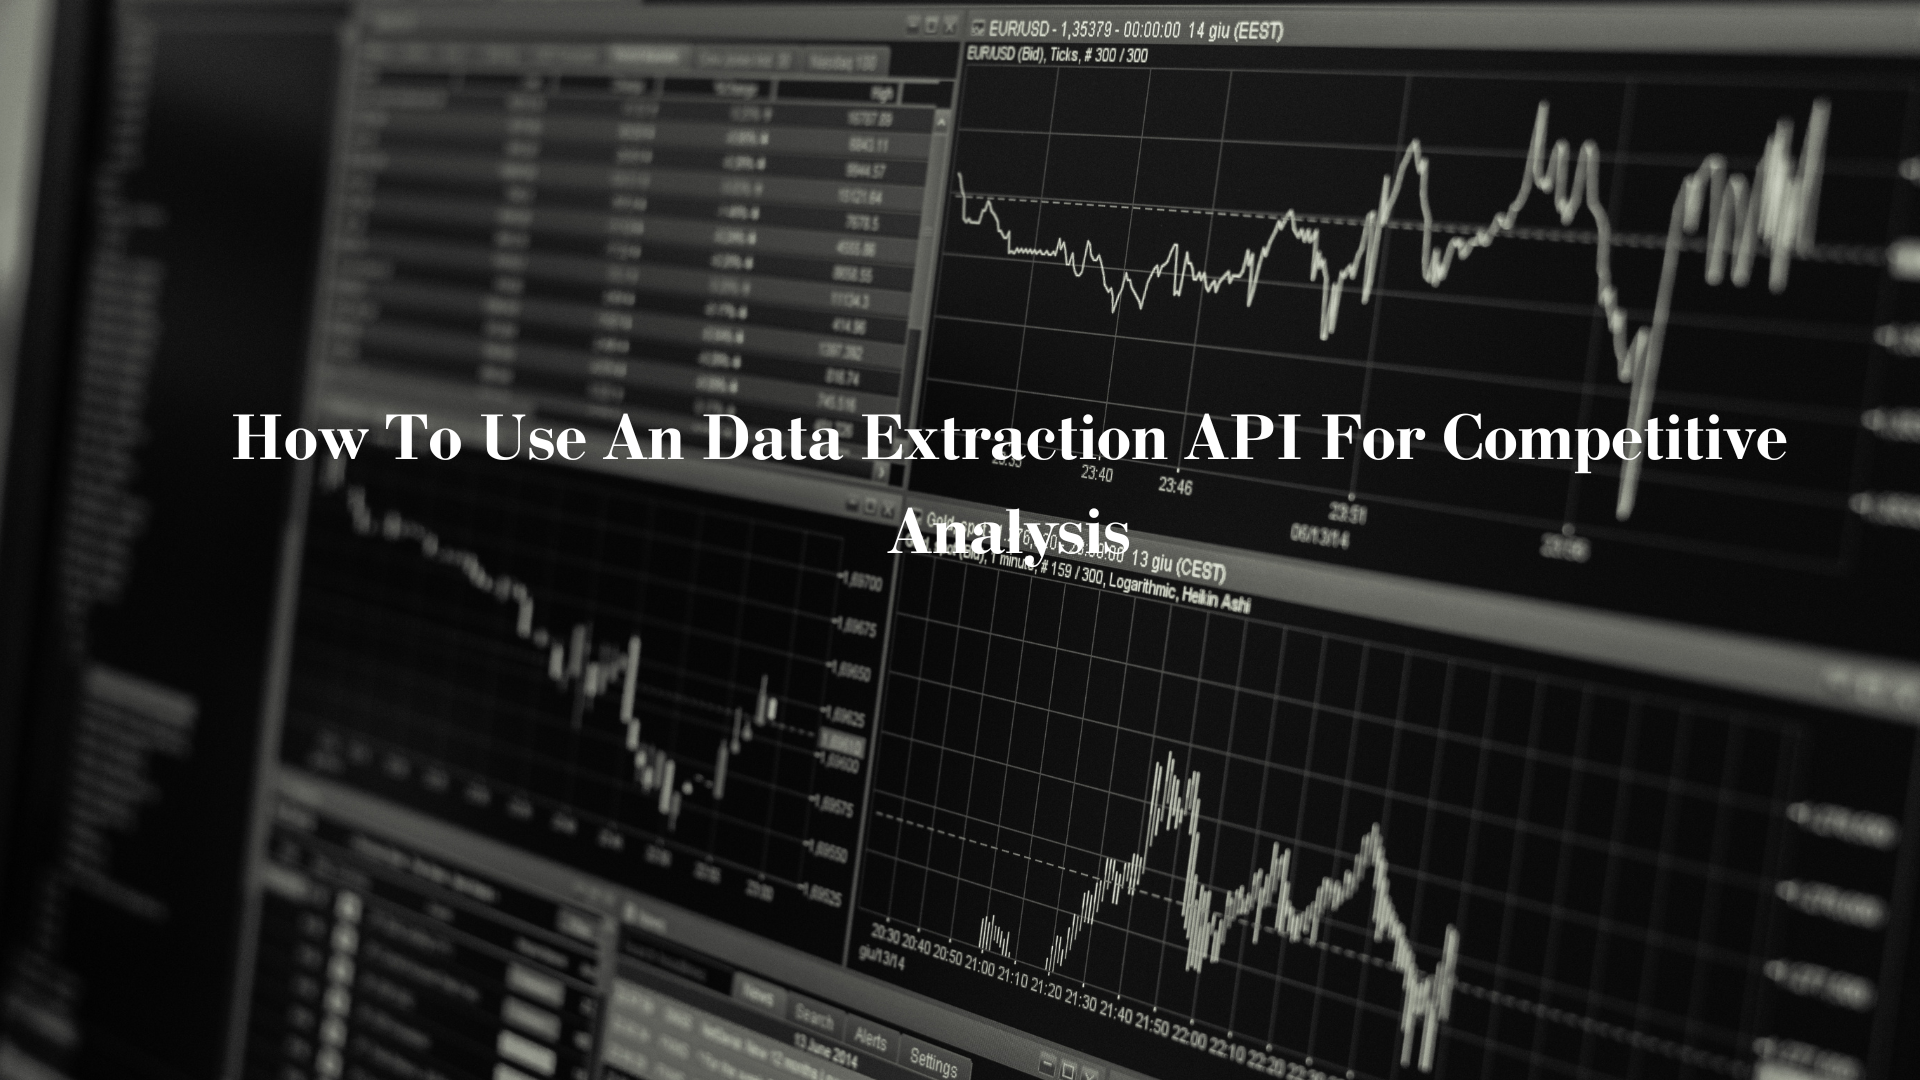 How To Use An Data Extraction API For Competitive Analysis